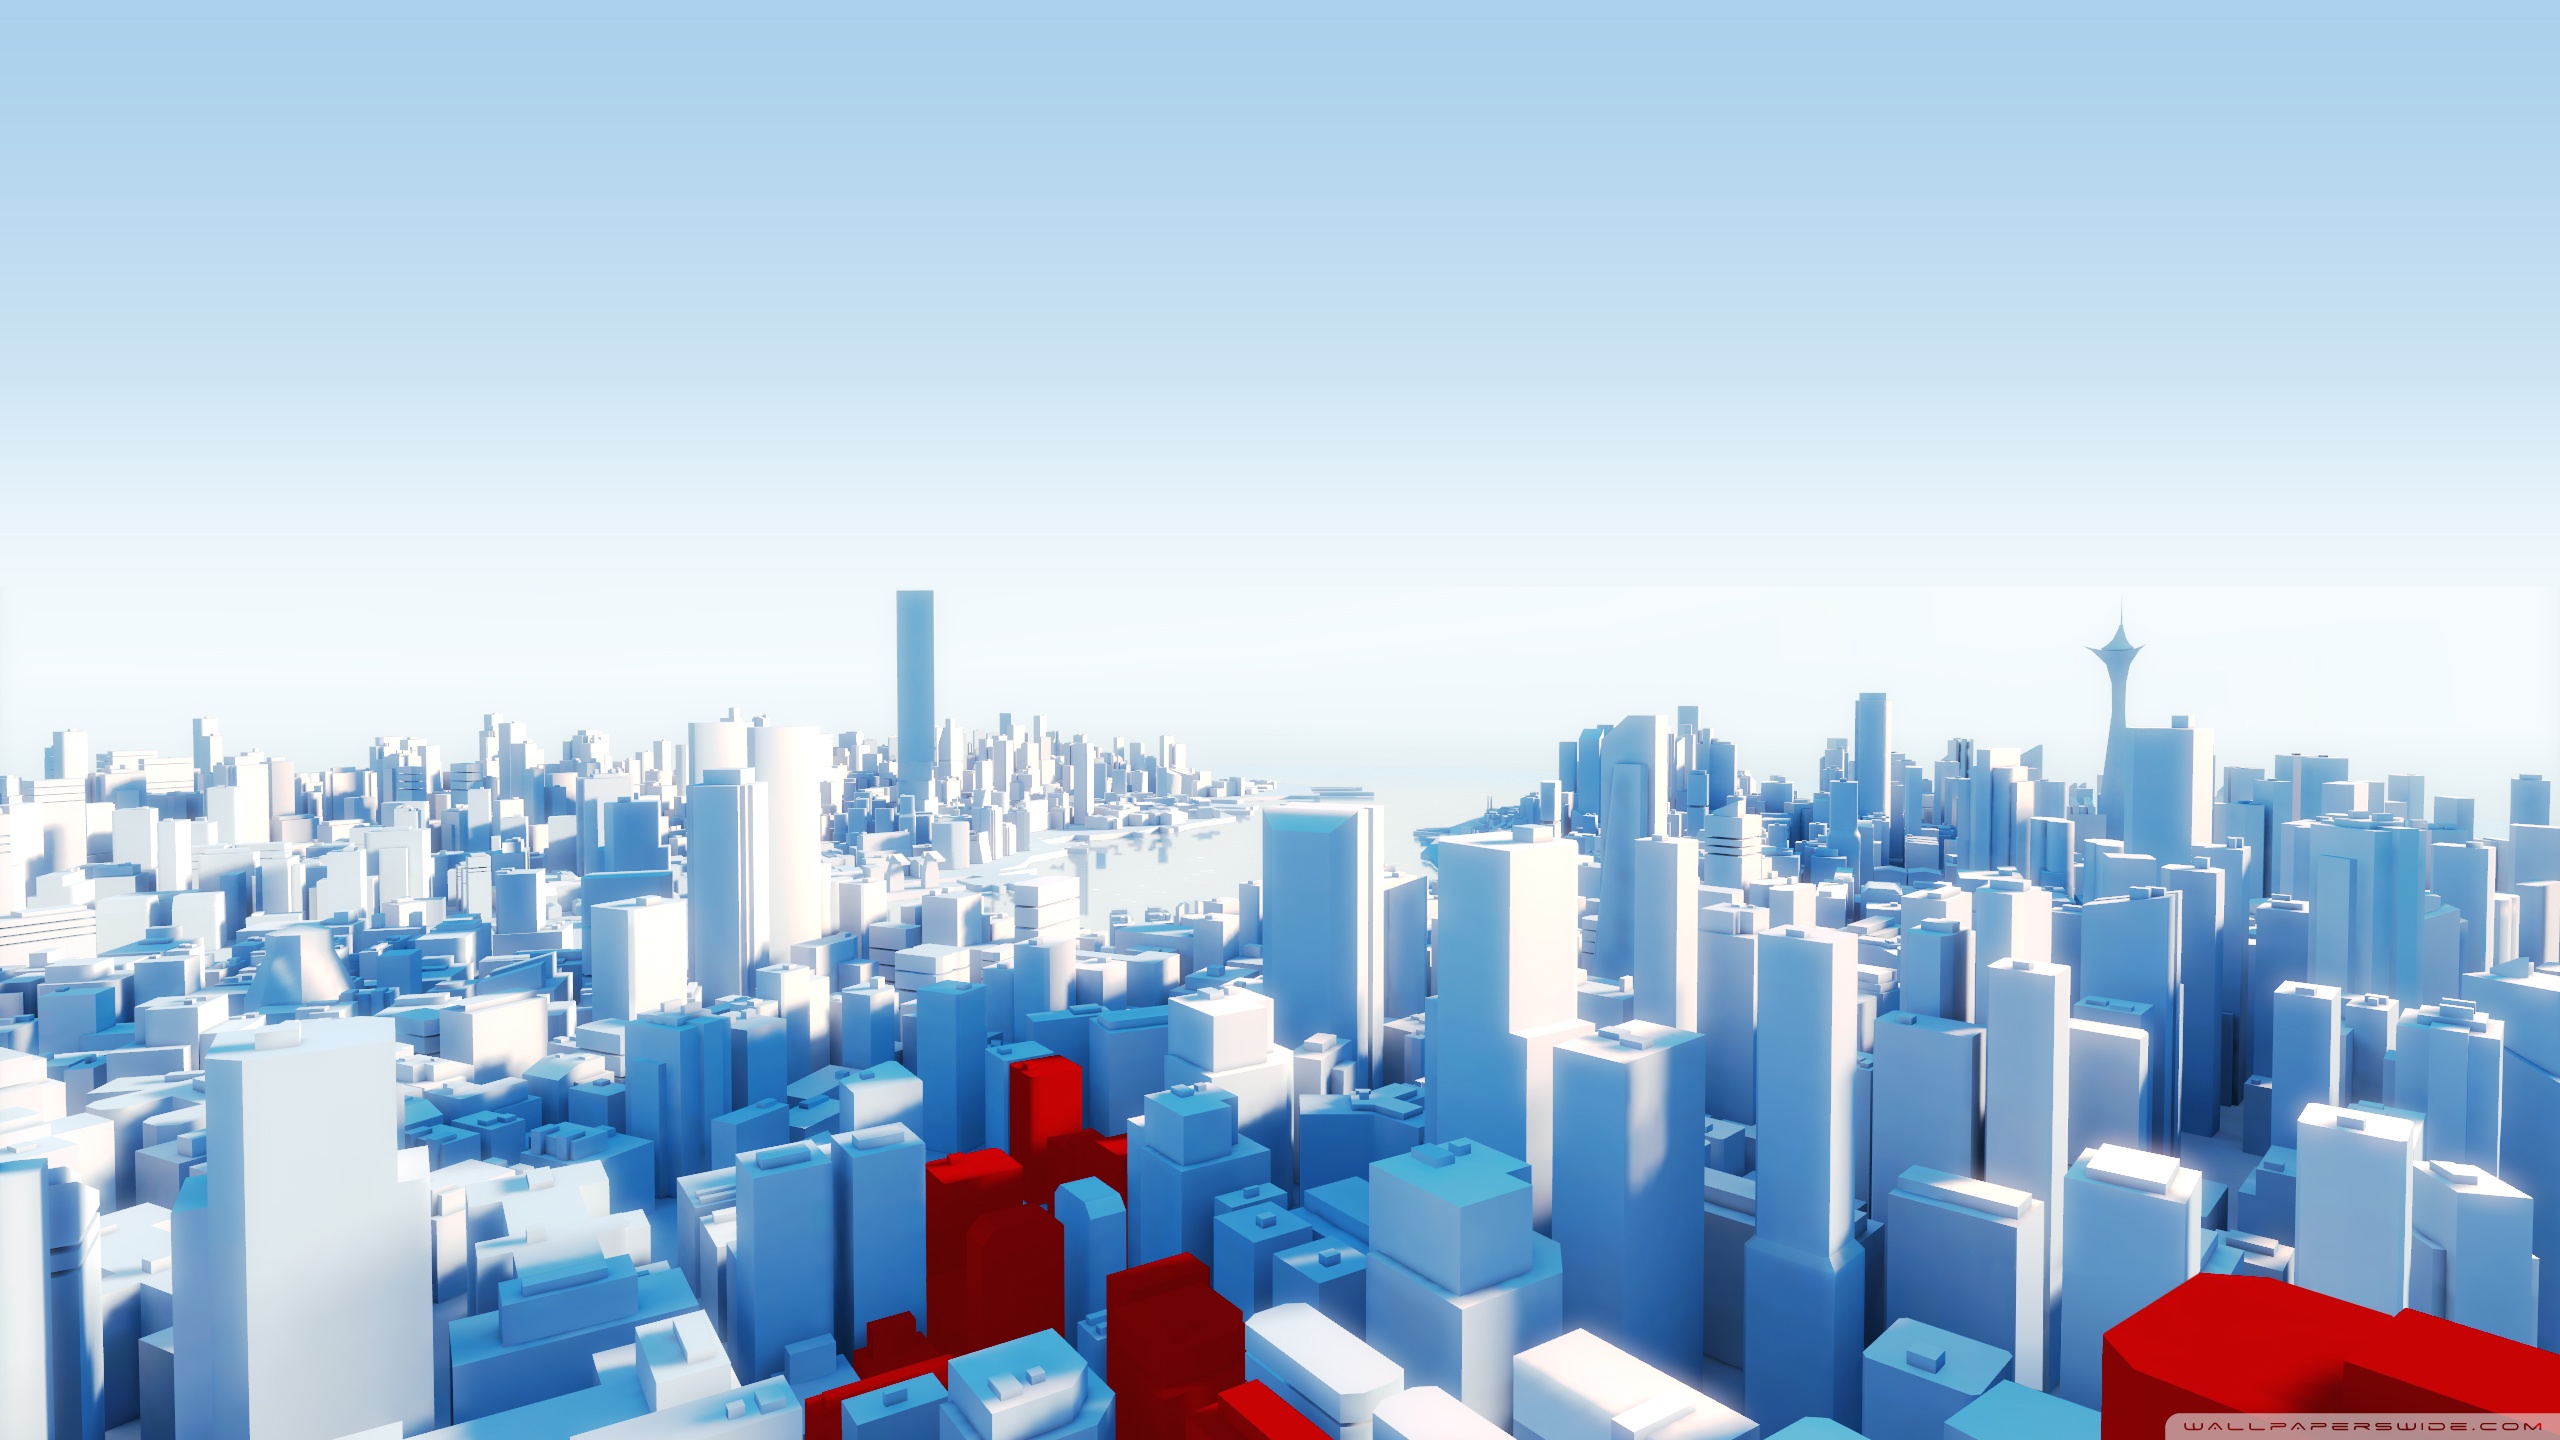 Related Wallpapers - Mirror's Edge Wallpaper 1080p , HD Wallpaper & Backgrounds